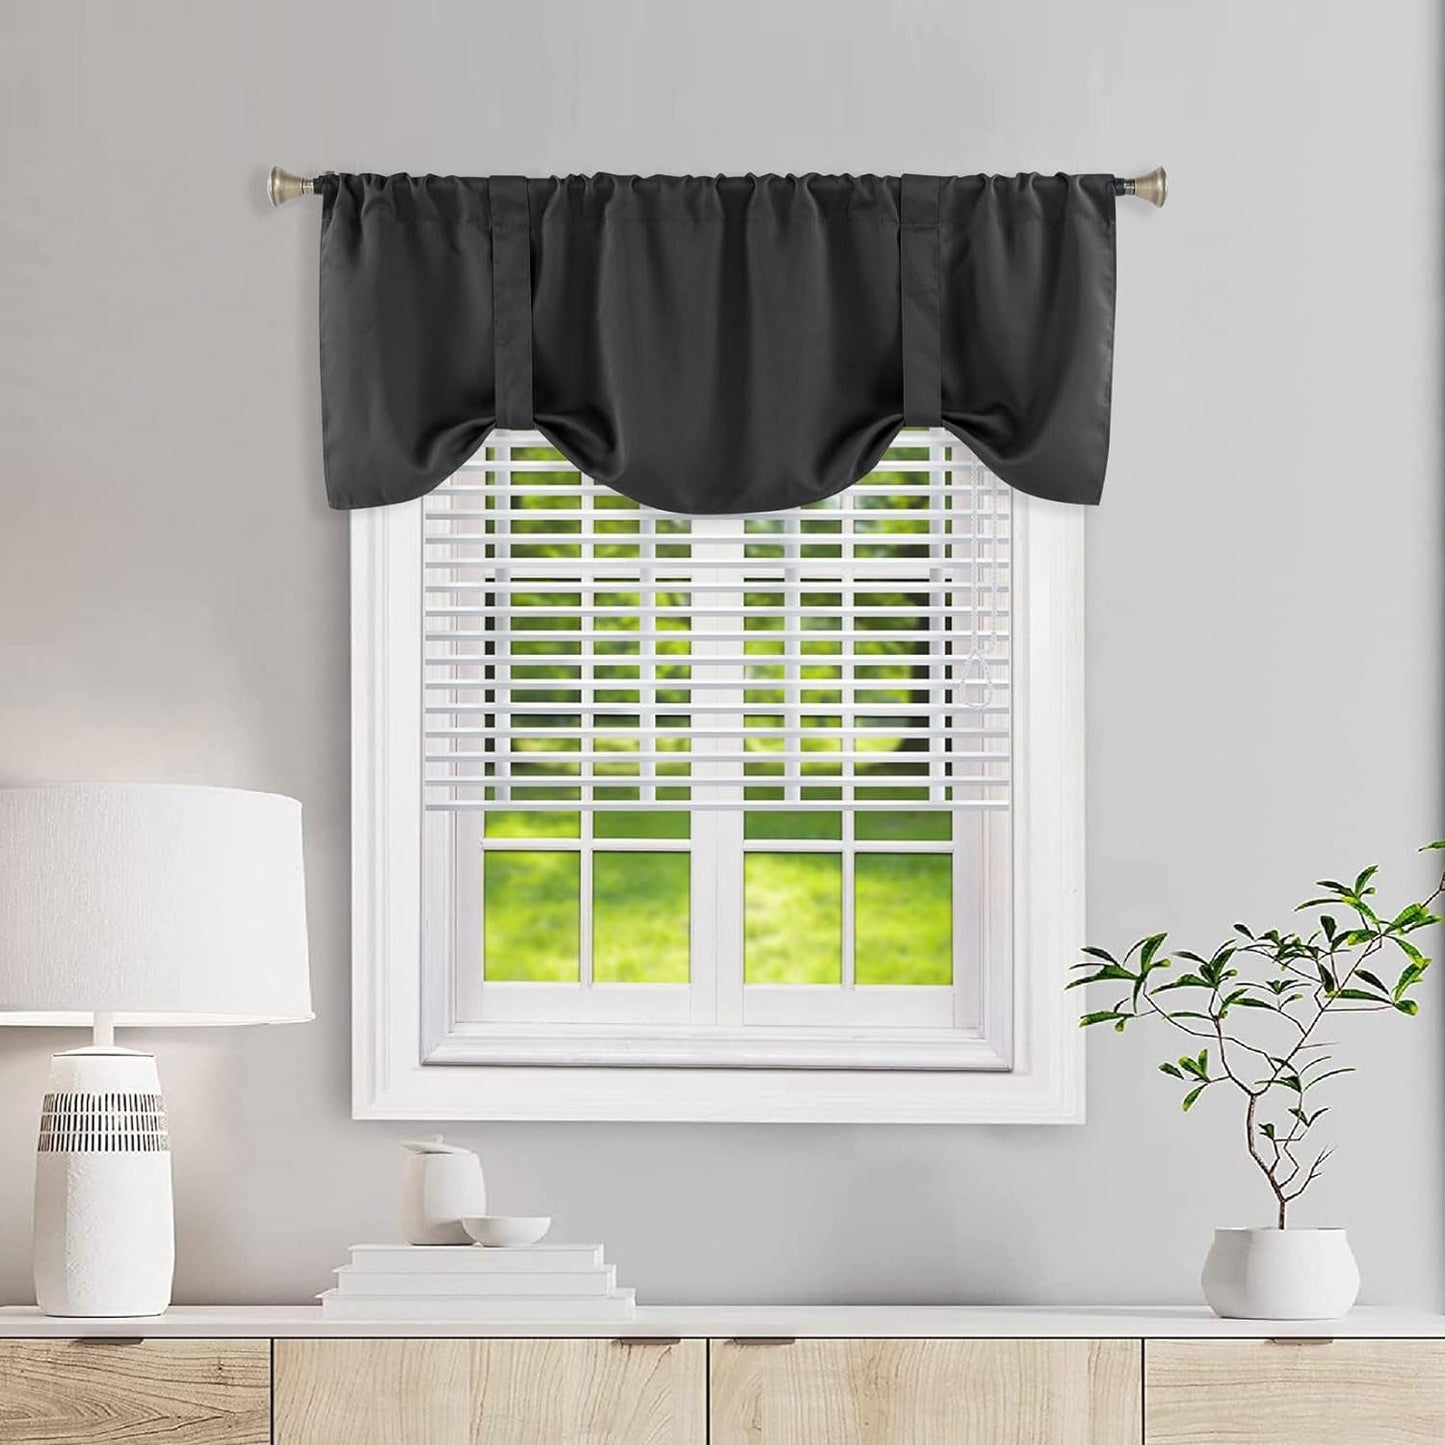 Home Queen Blackout Tie up Curtain Valance, Bathroom Window Valence for Kitchen Bedroom,Straight and Wave Shape Available, 54 X 20 Inches, Black